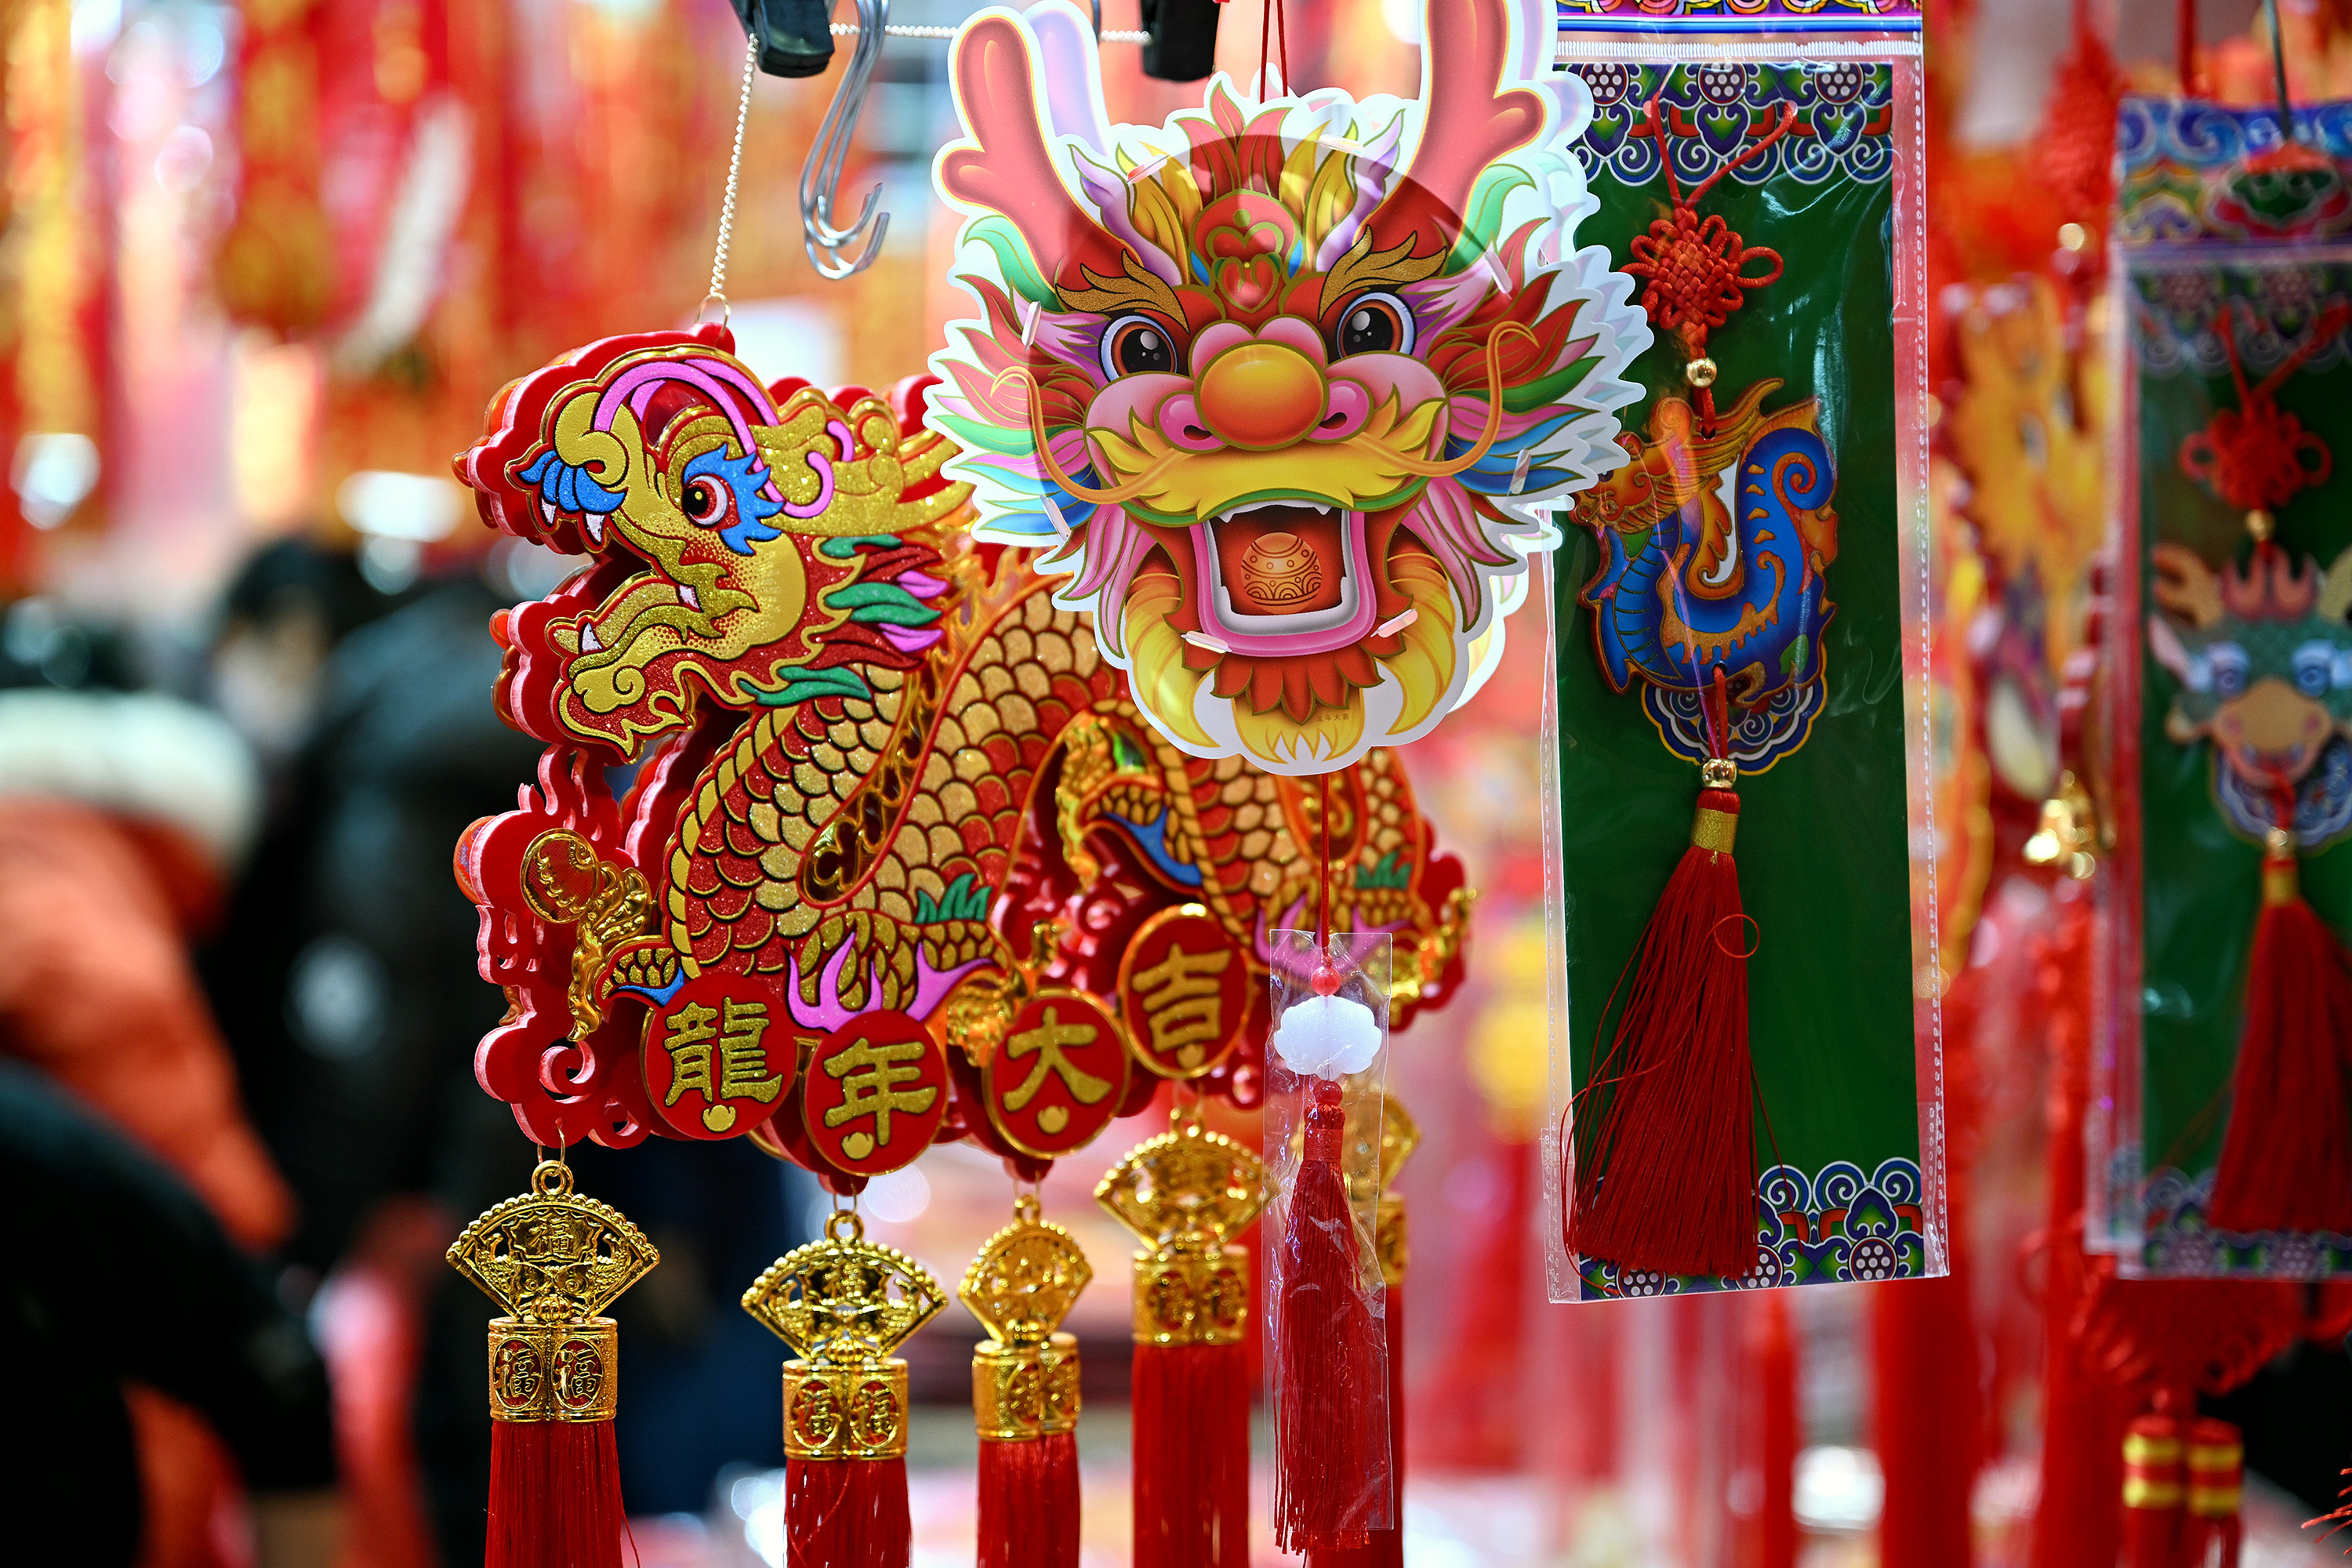 New Year ornaments featuring the Chinese dragon are seen at a small commodity market in Shenyang City, northeast China's Liaoning Province, December 24, 2023. /CFP